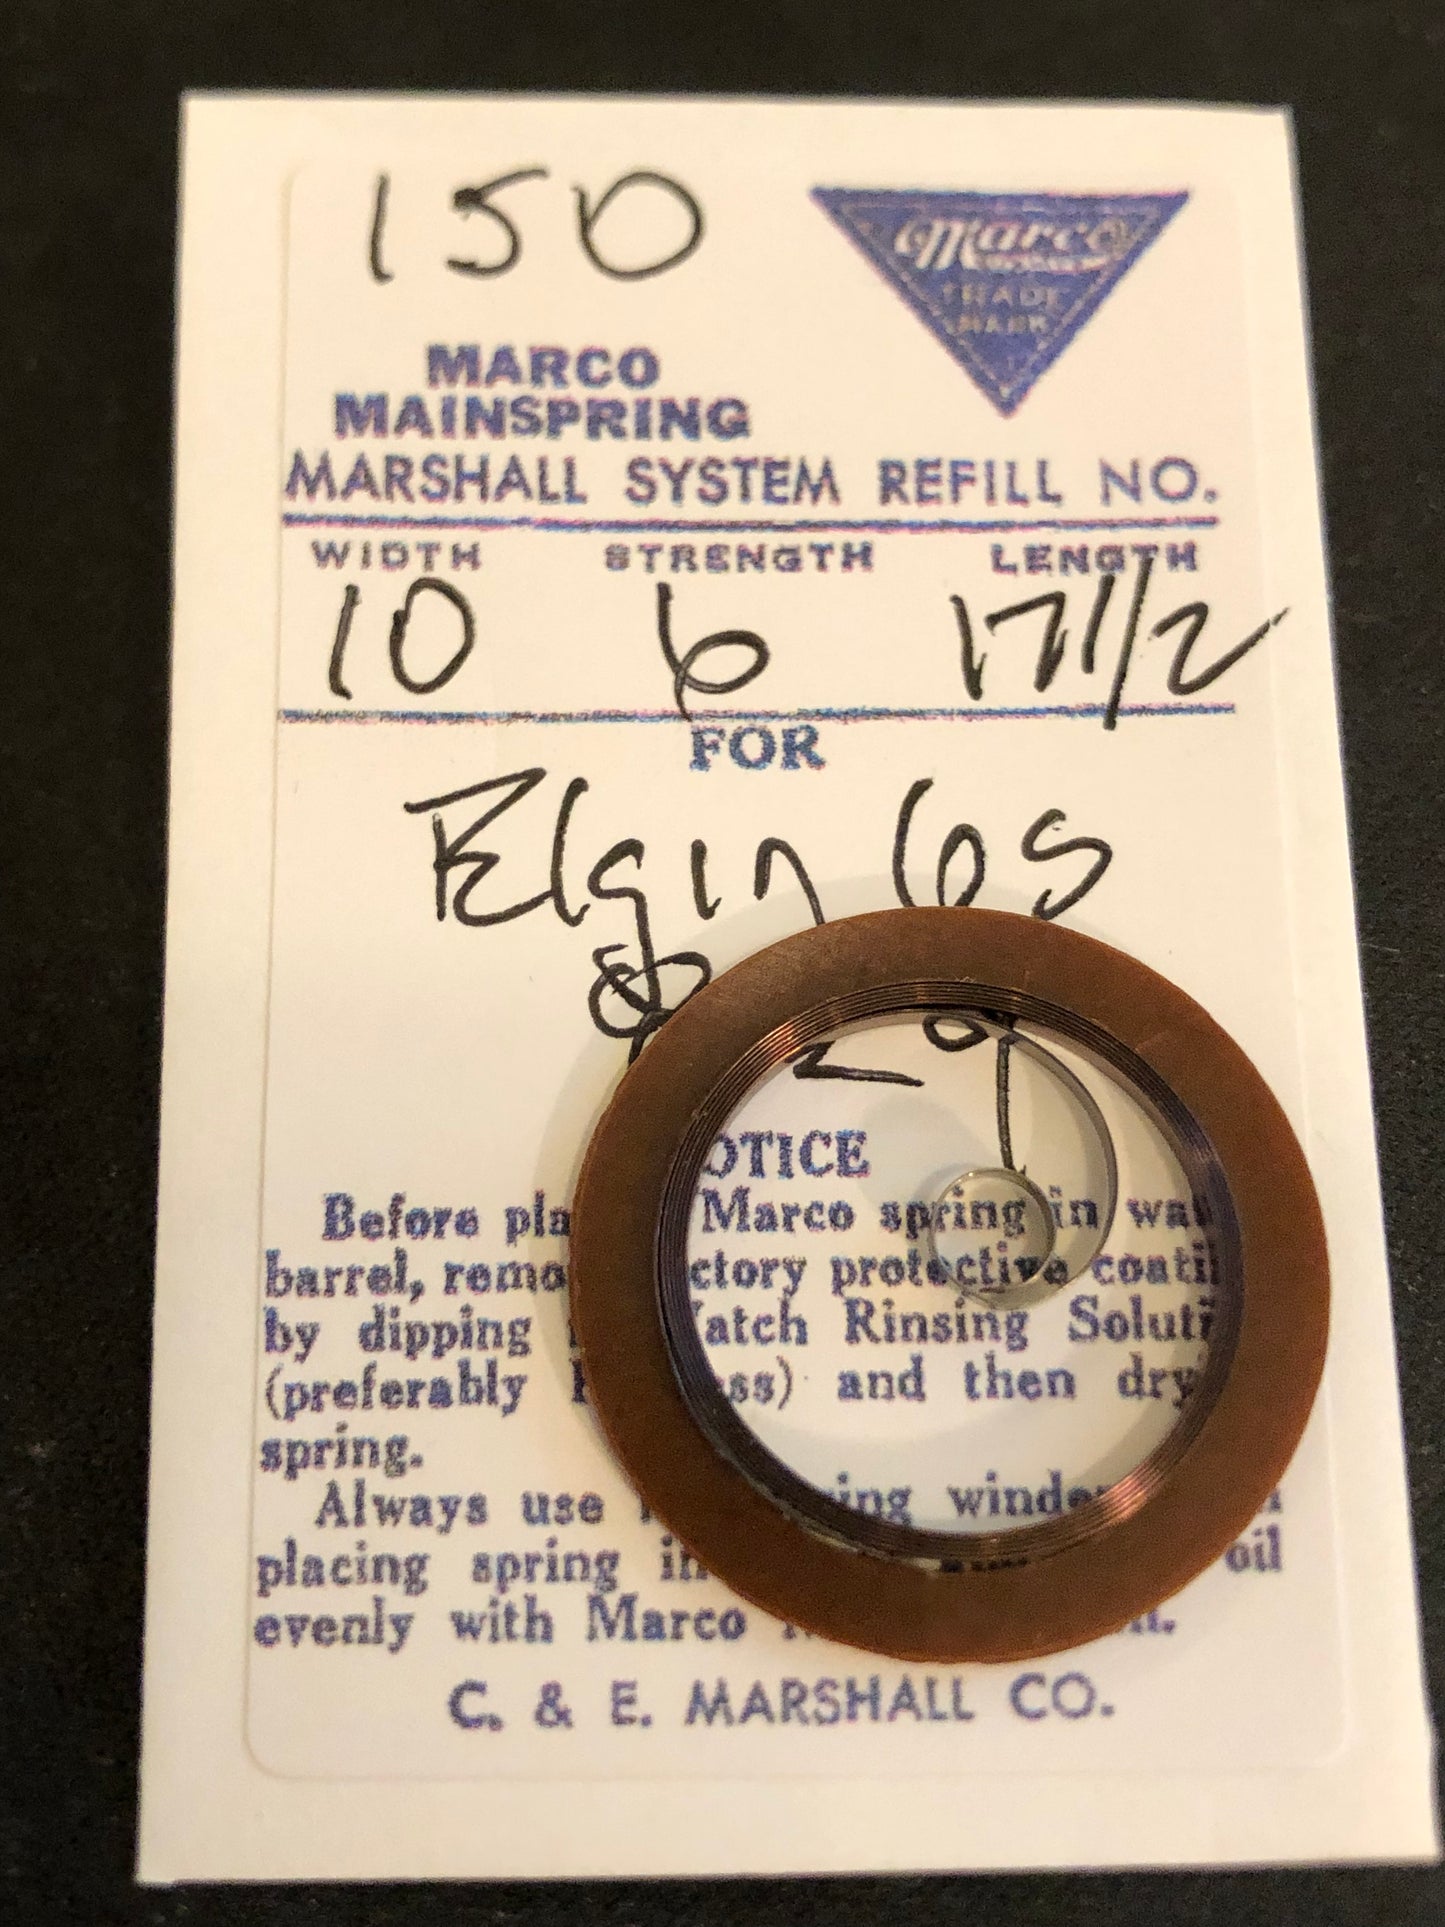 Marco Mainspring #150 for 6s Elgin movements Factory No. 824 - Steel